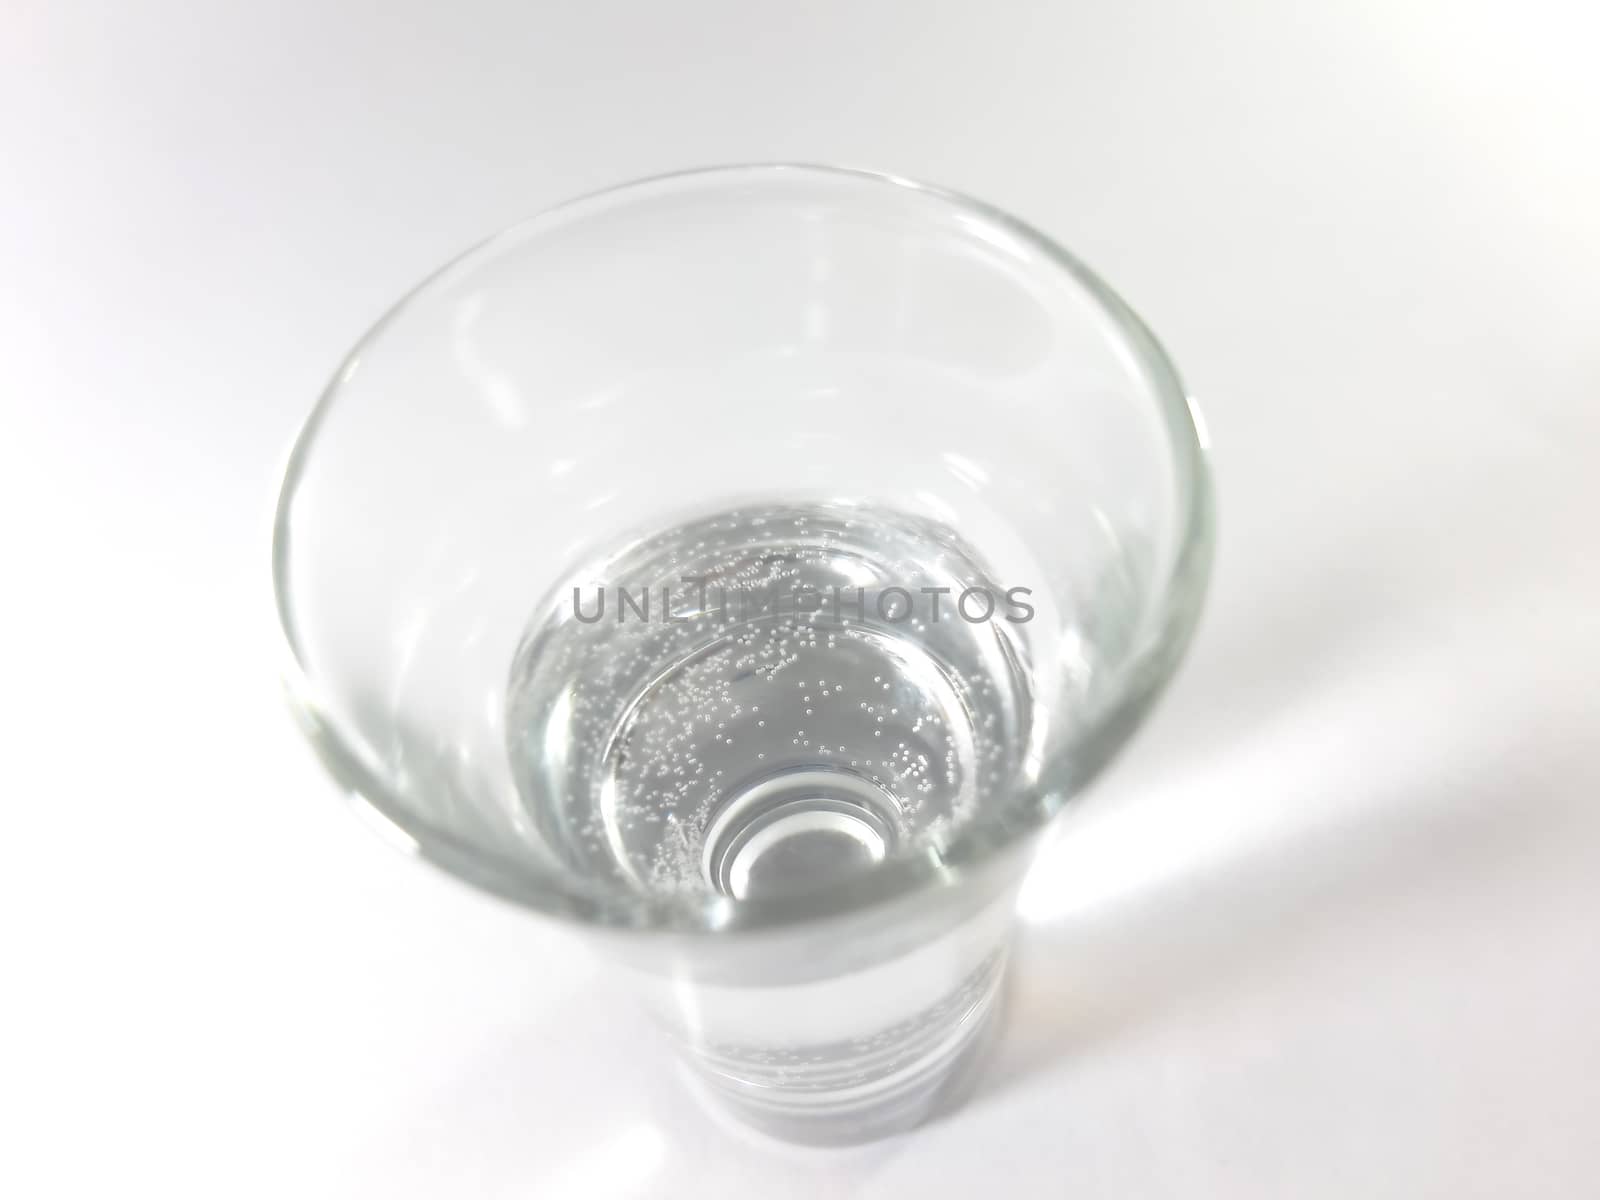 Drink in a transparent glass. Liquid pure water in a glass. Phot by polyachenkovv@gmail.com